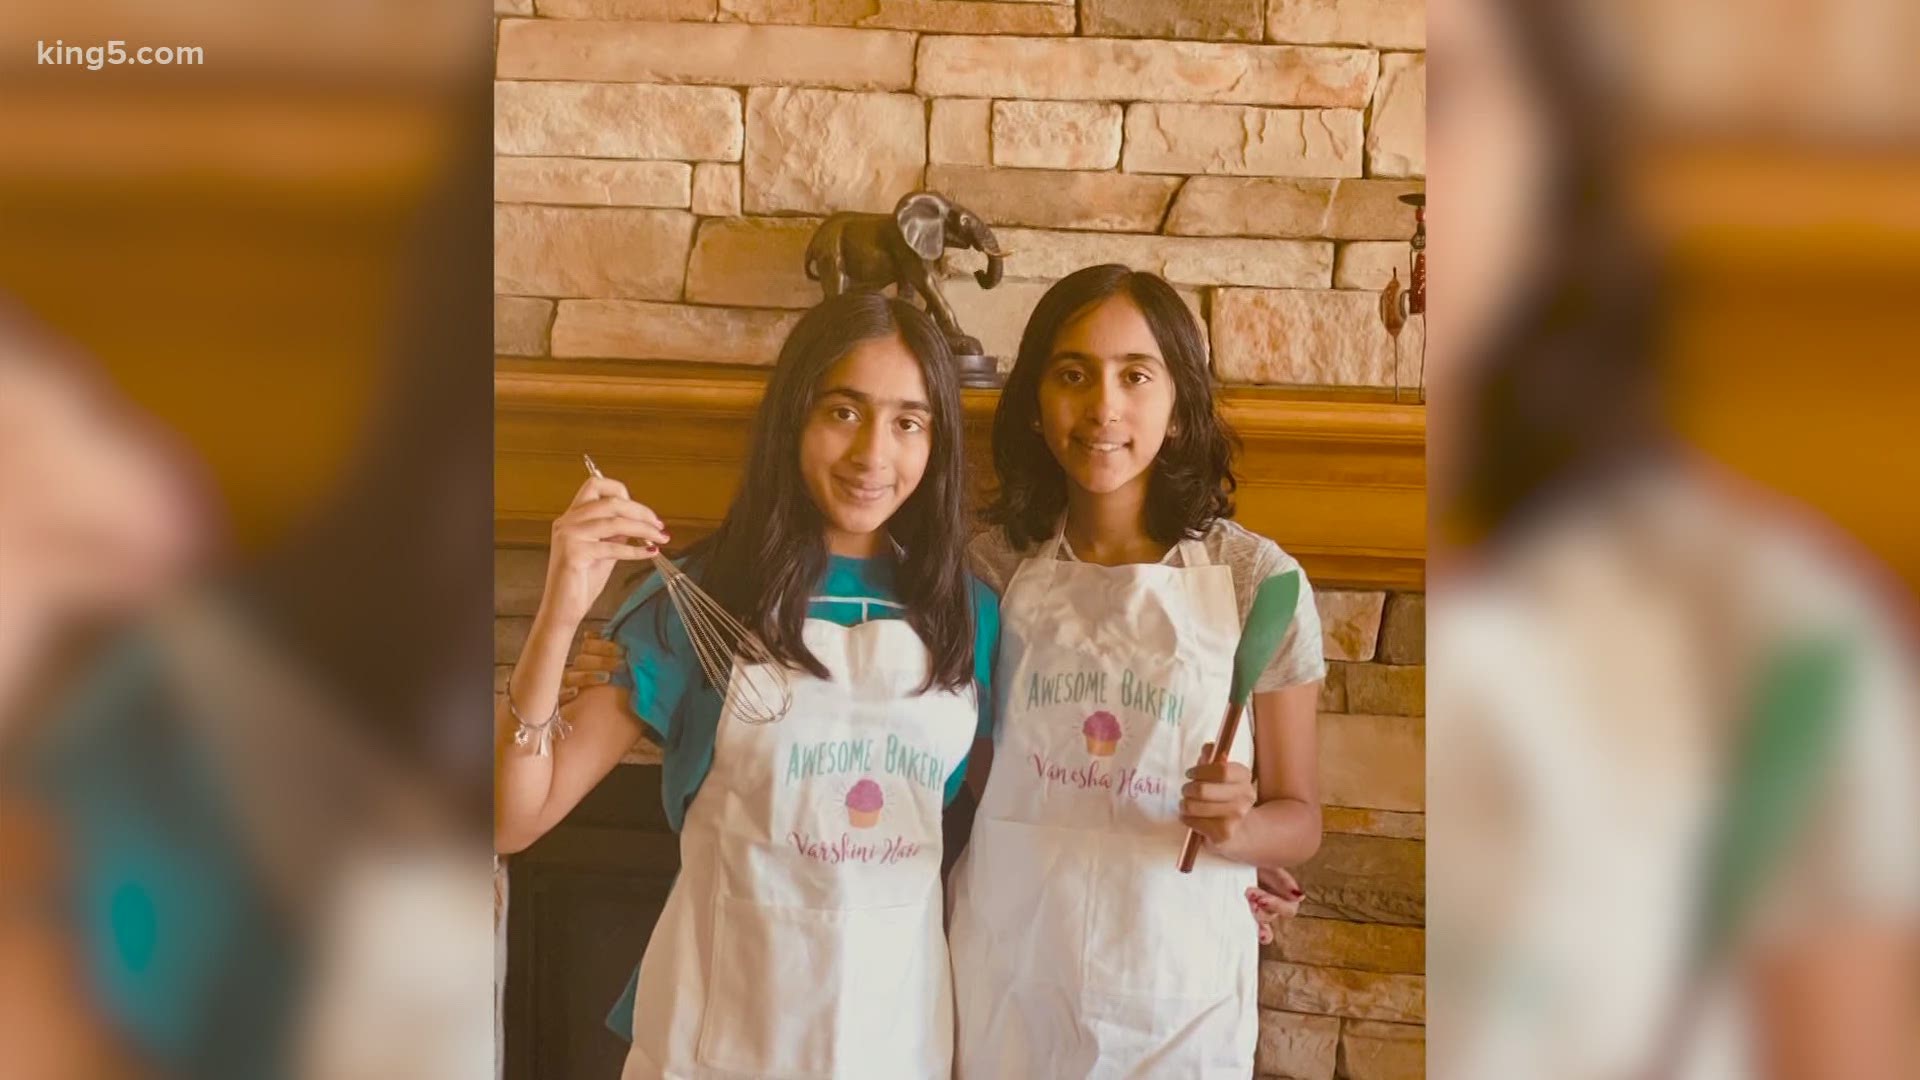 Vanesha Hari, 14, and her sister Varshini, 12, created JoysofGiving.org to raise money for kids in need and to host classes on cooking and STEM.